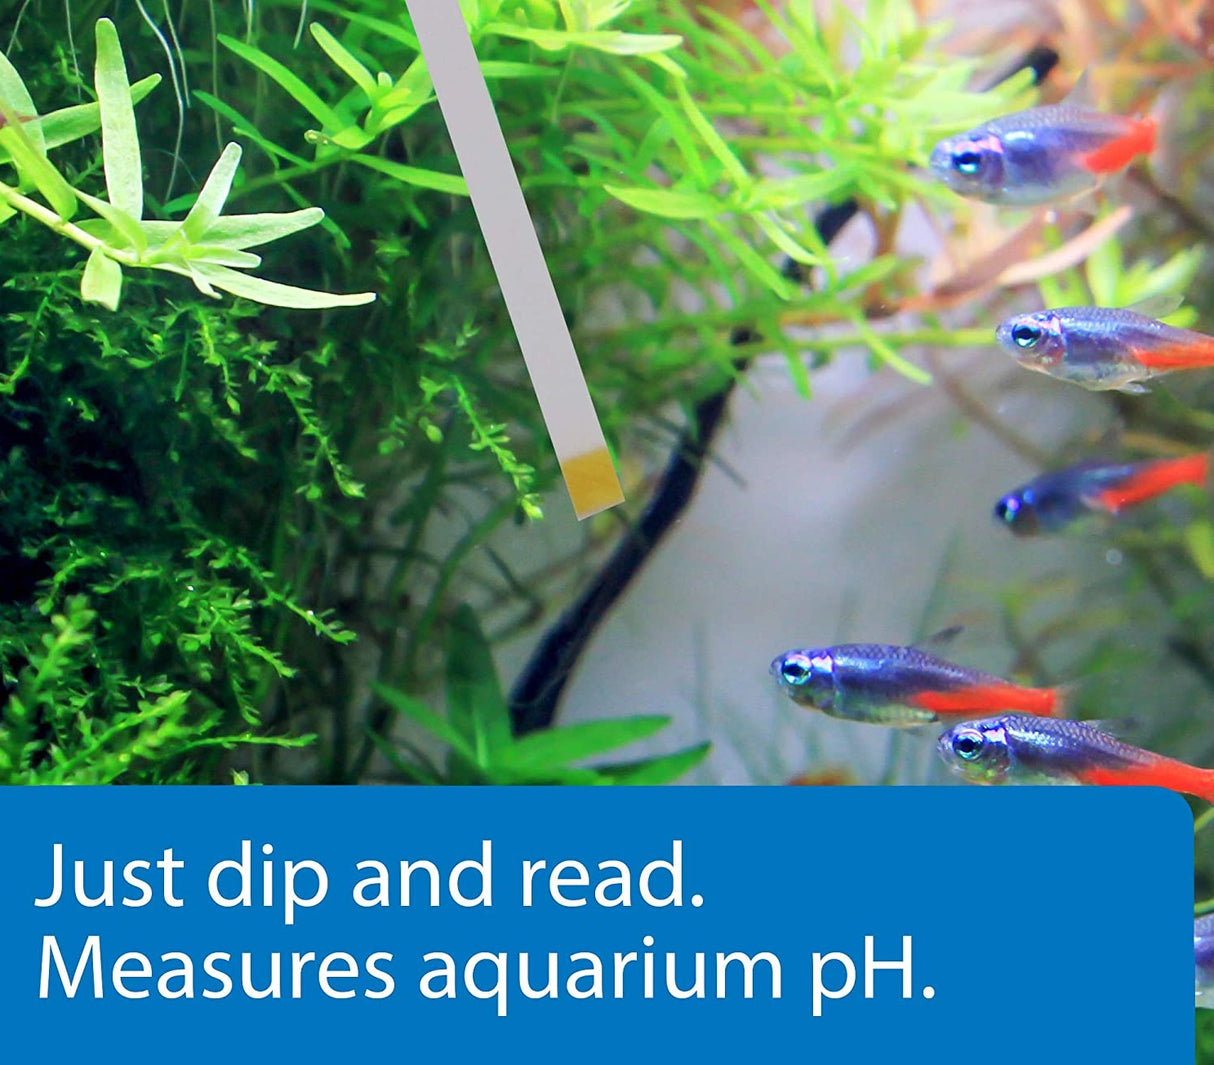 75 count (3 x 25 ct) API pH Test Strips for Freshwater and Saltwater Aquariums